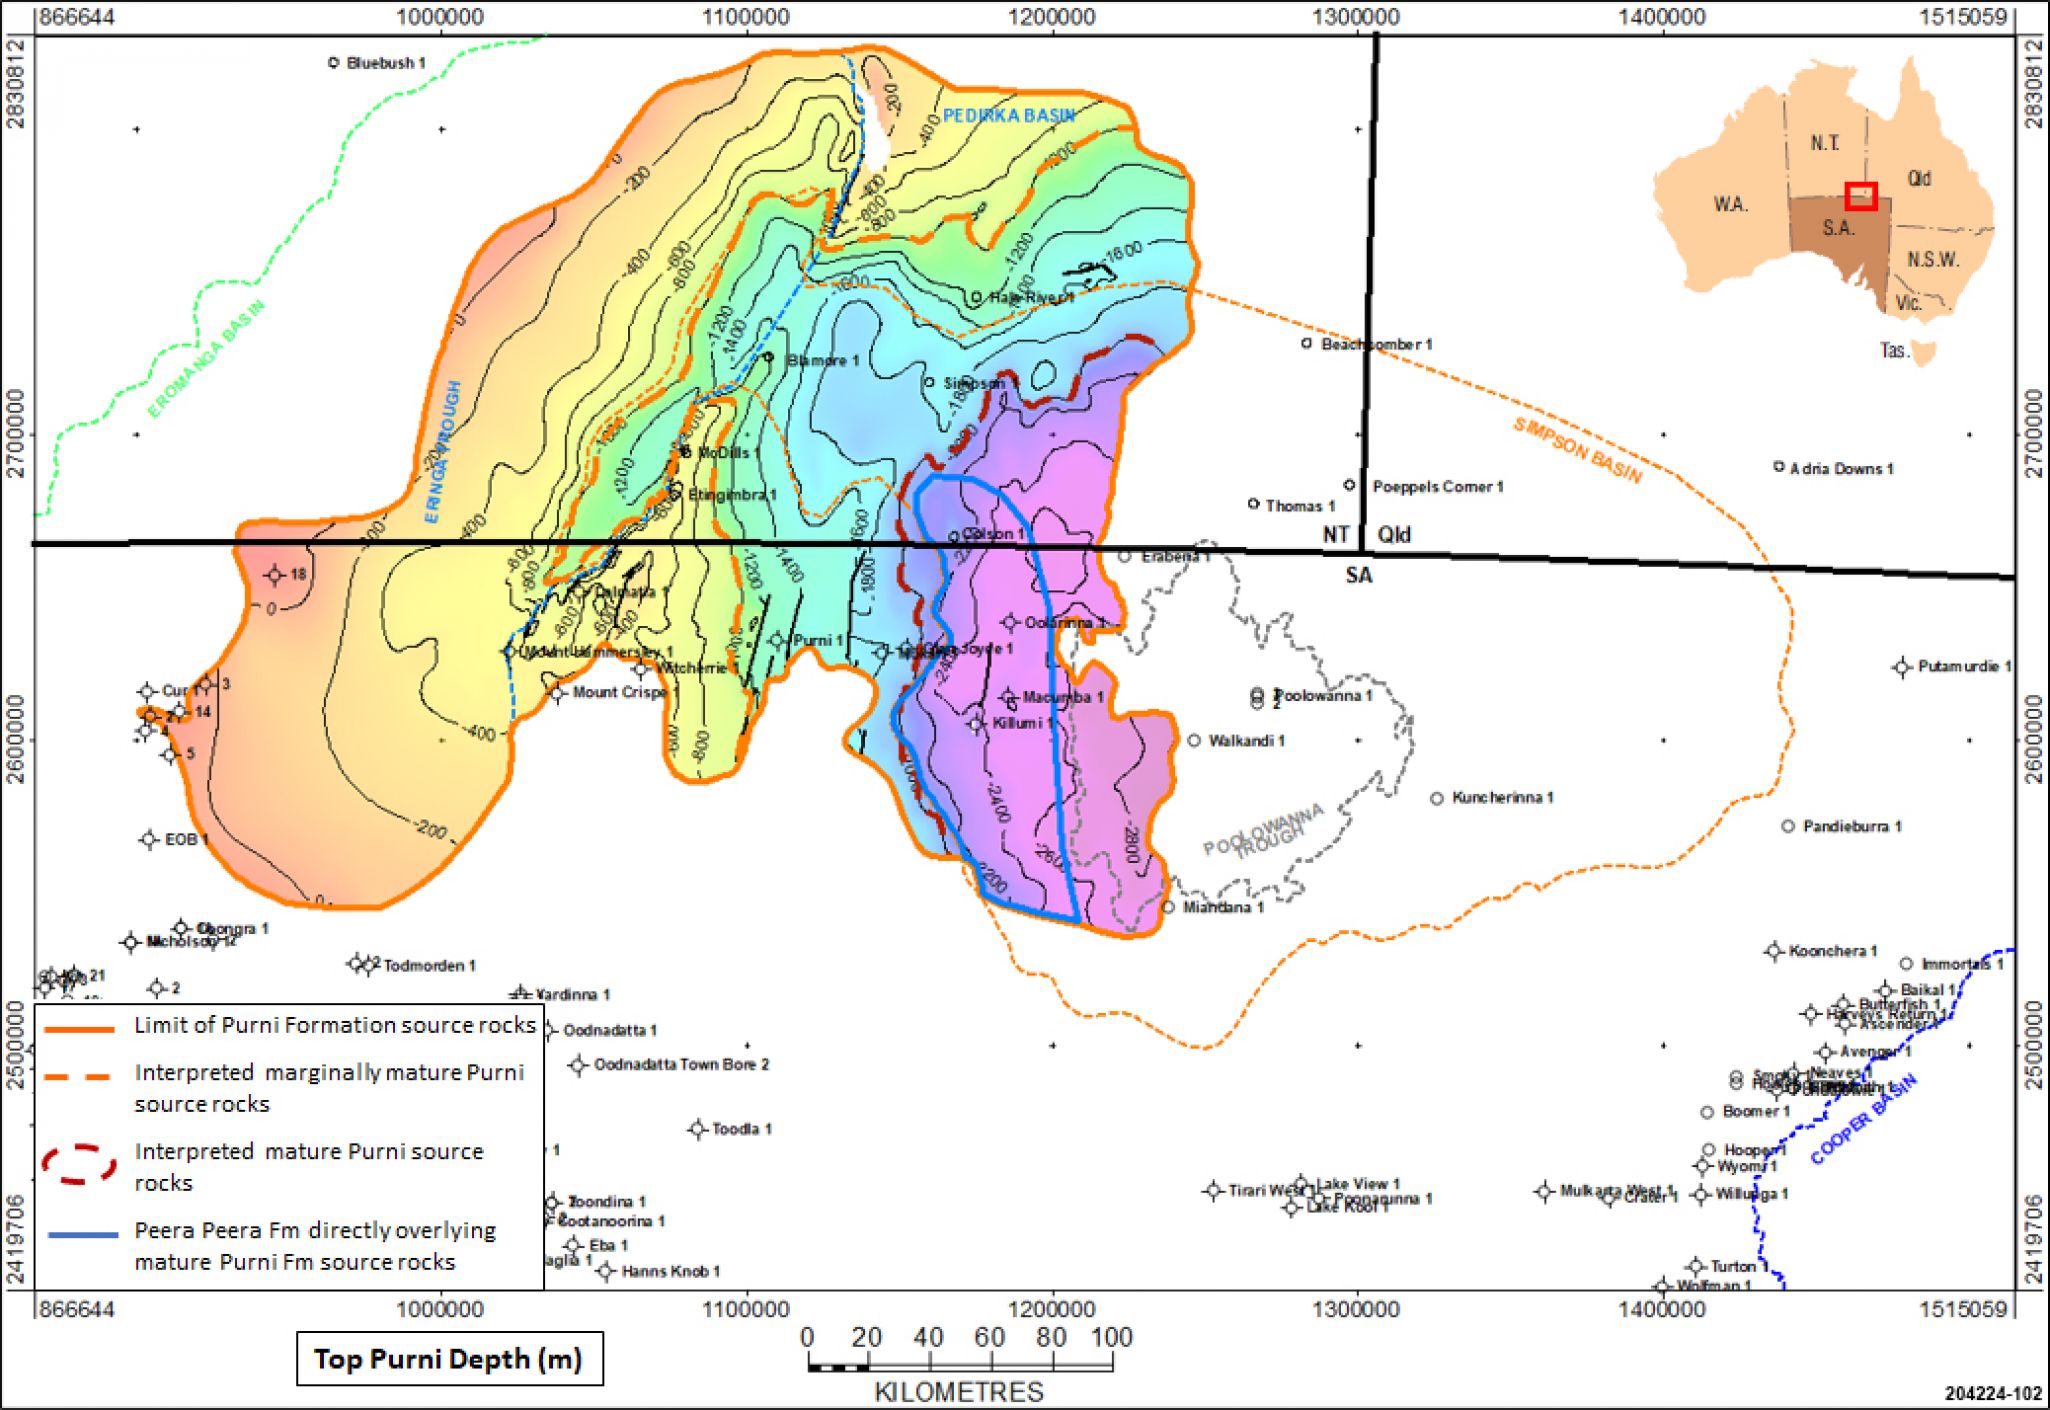 Approximate extent of Peera Peera Formation directly overlying mature Purni Formation source rocks of the Pedirka Basin